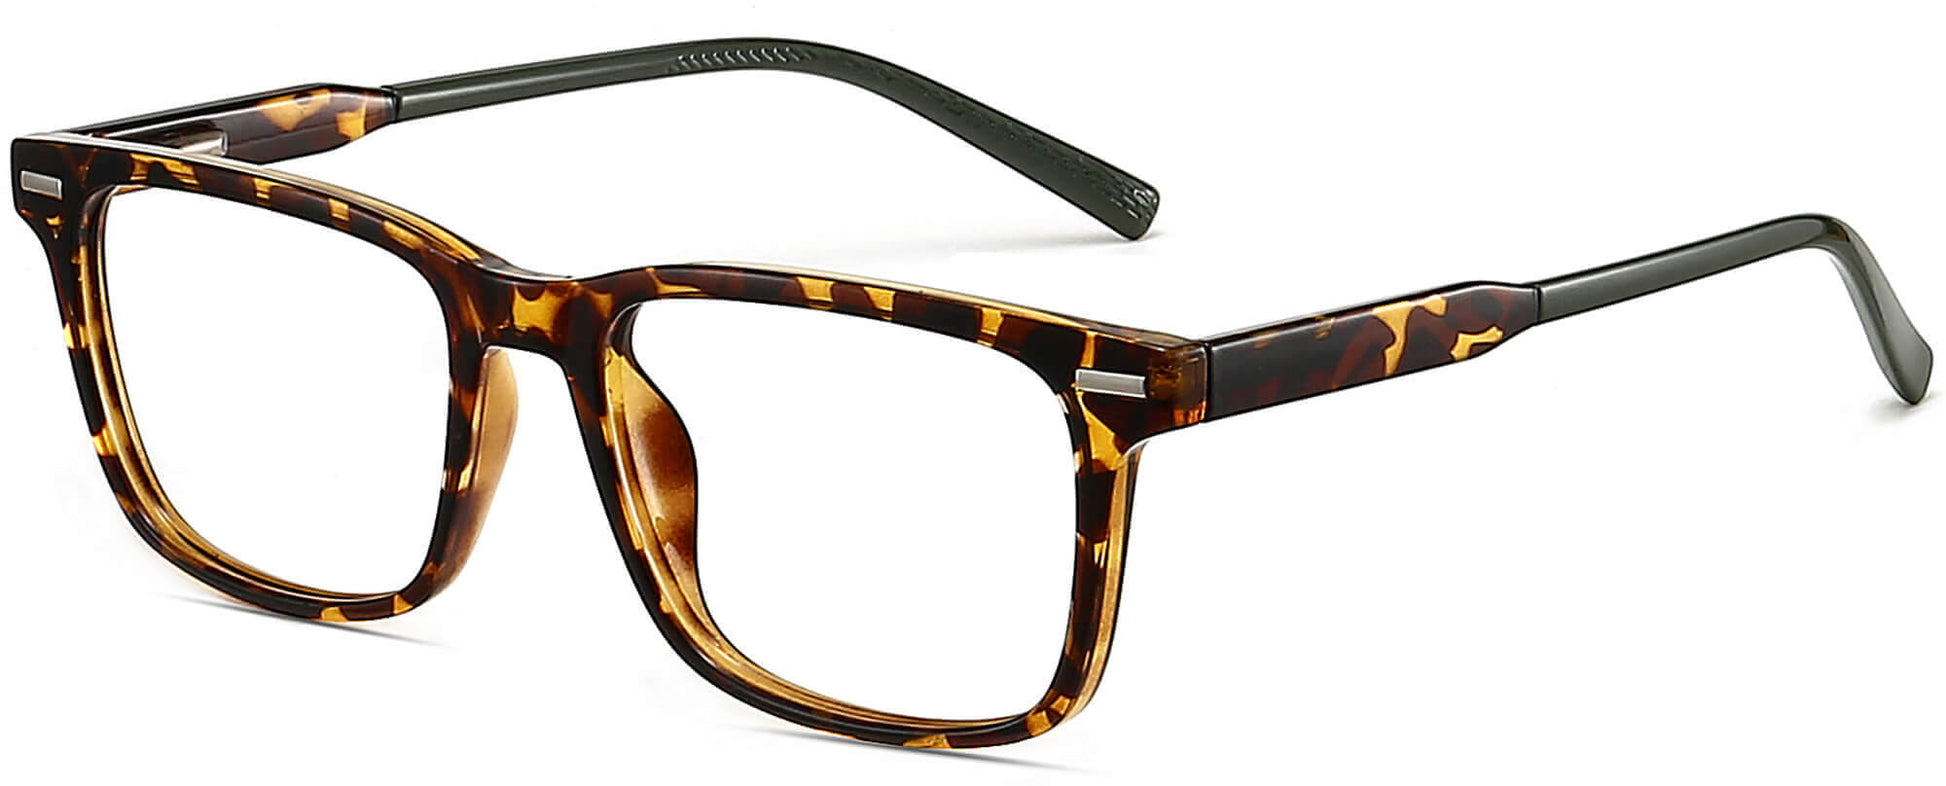 King Square Tortoise Eyeglasses from ANRRI, angle view